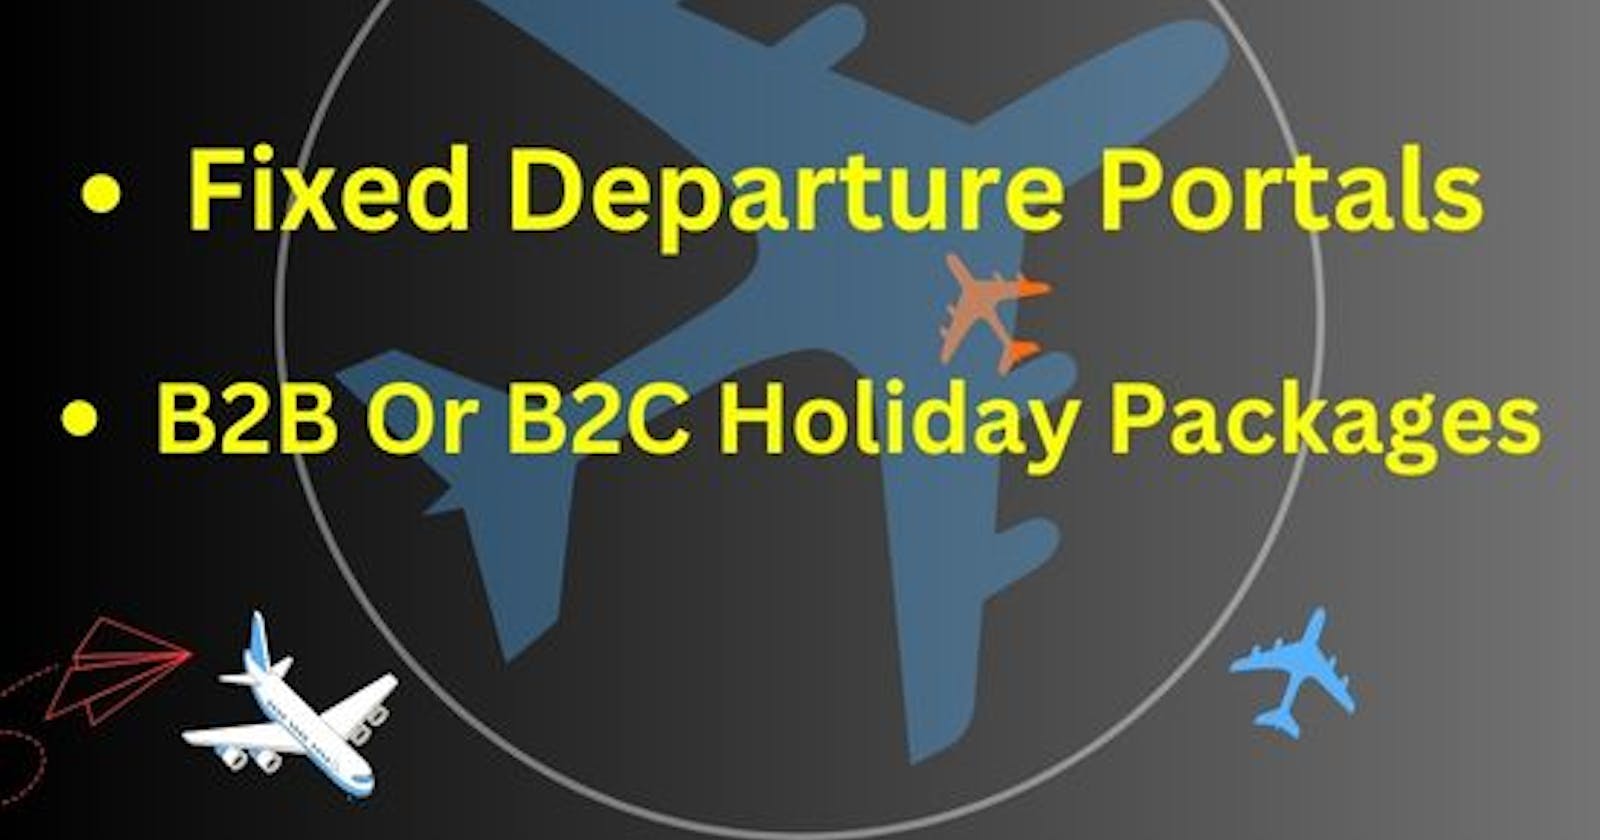 Exploring the Difference between B2B and B2C Holiday Packages